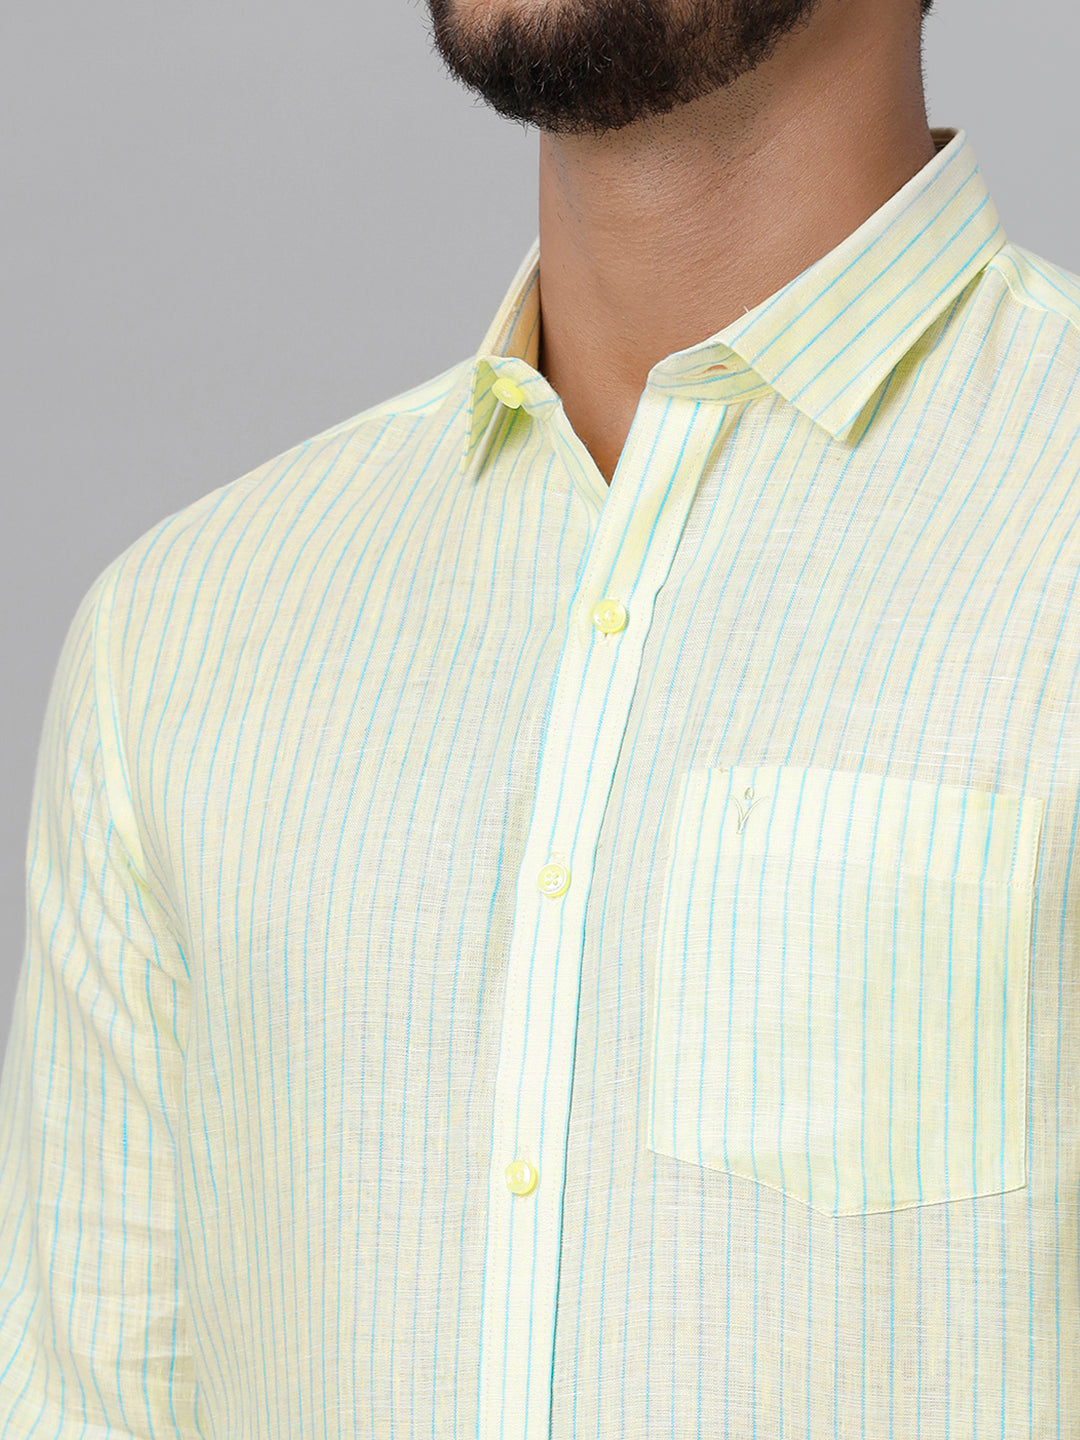 Mens Pure Linen Striped Full Sleeves Yellow Shirt LS27-Zooom view